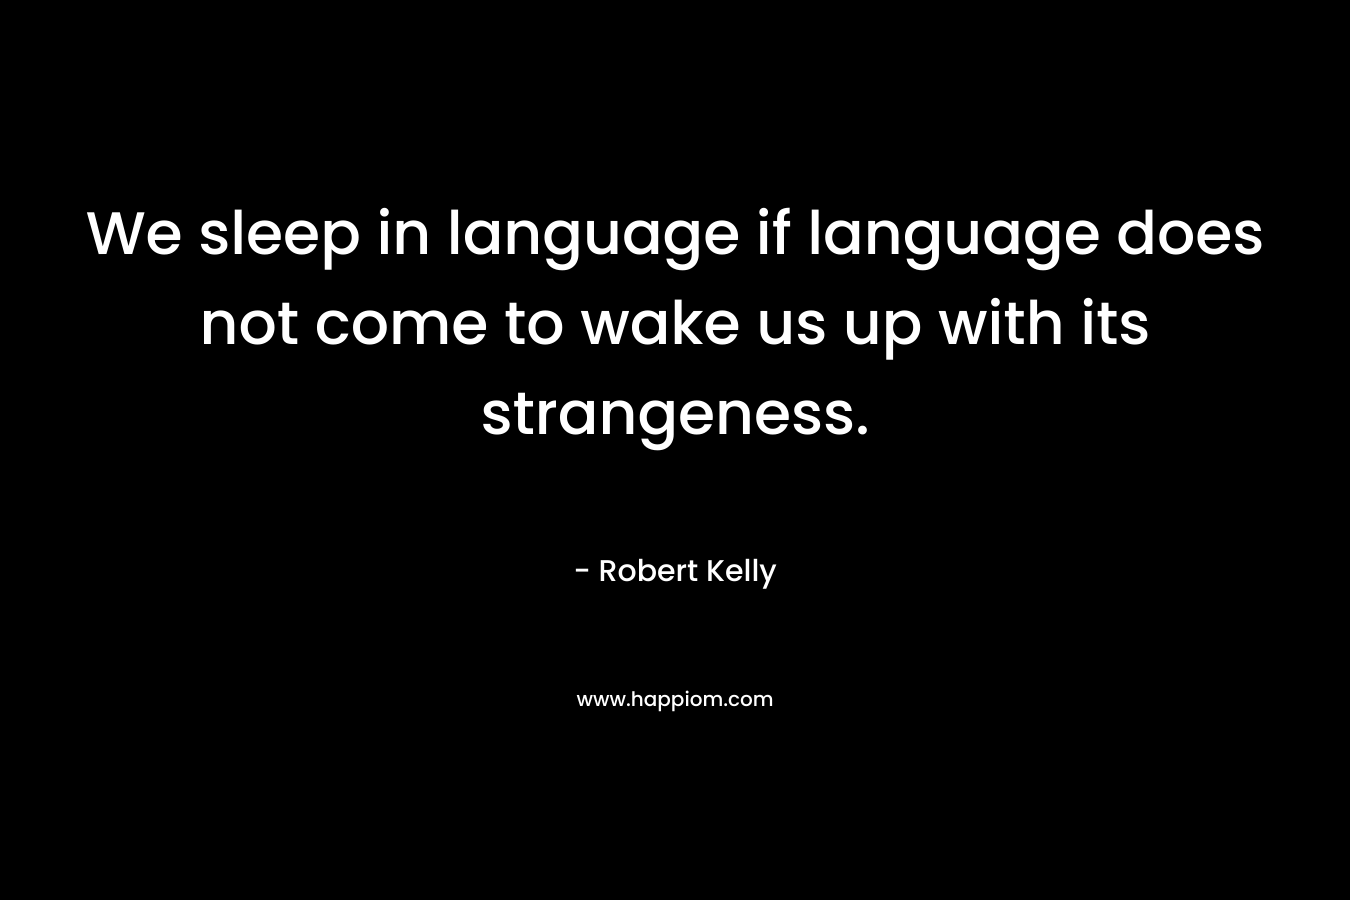 We sleep in language if language does not come to wake us up with its strangeness.